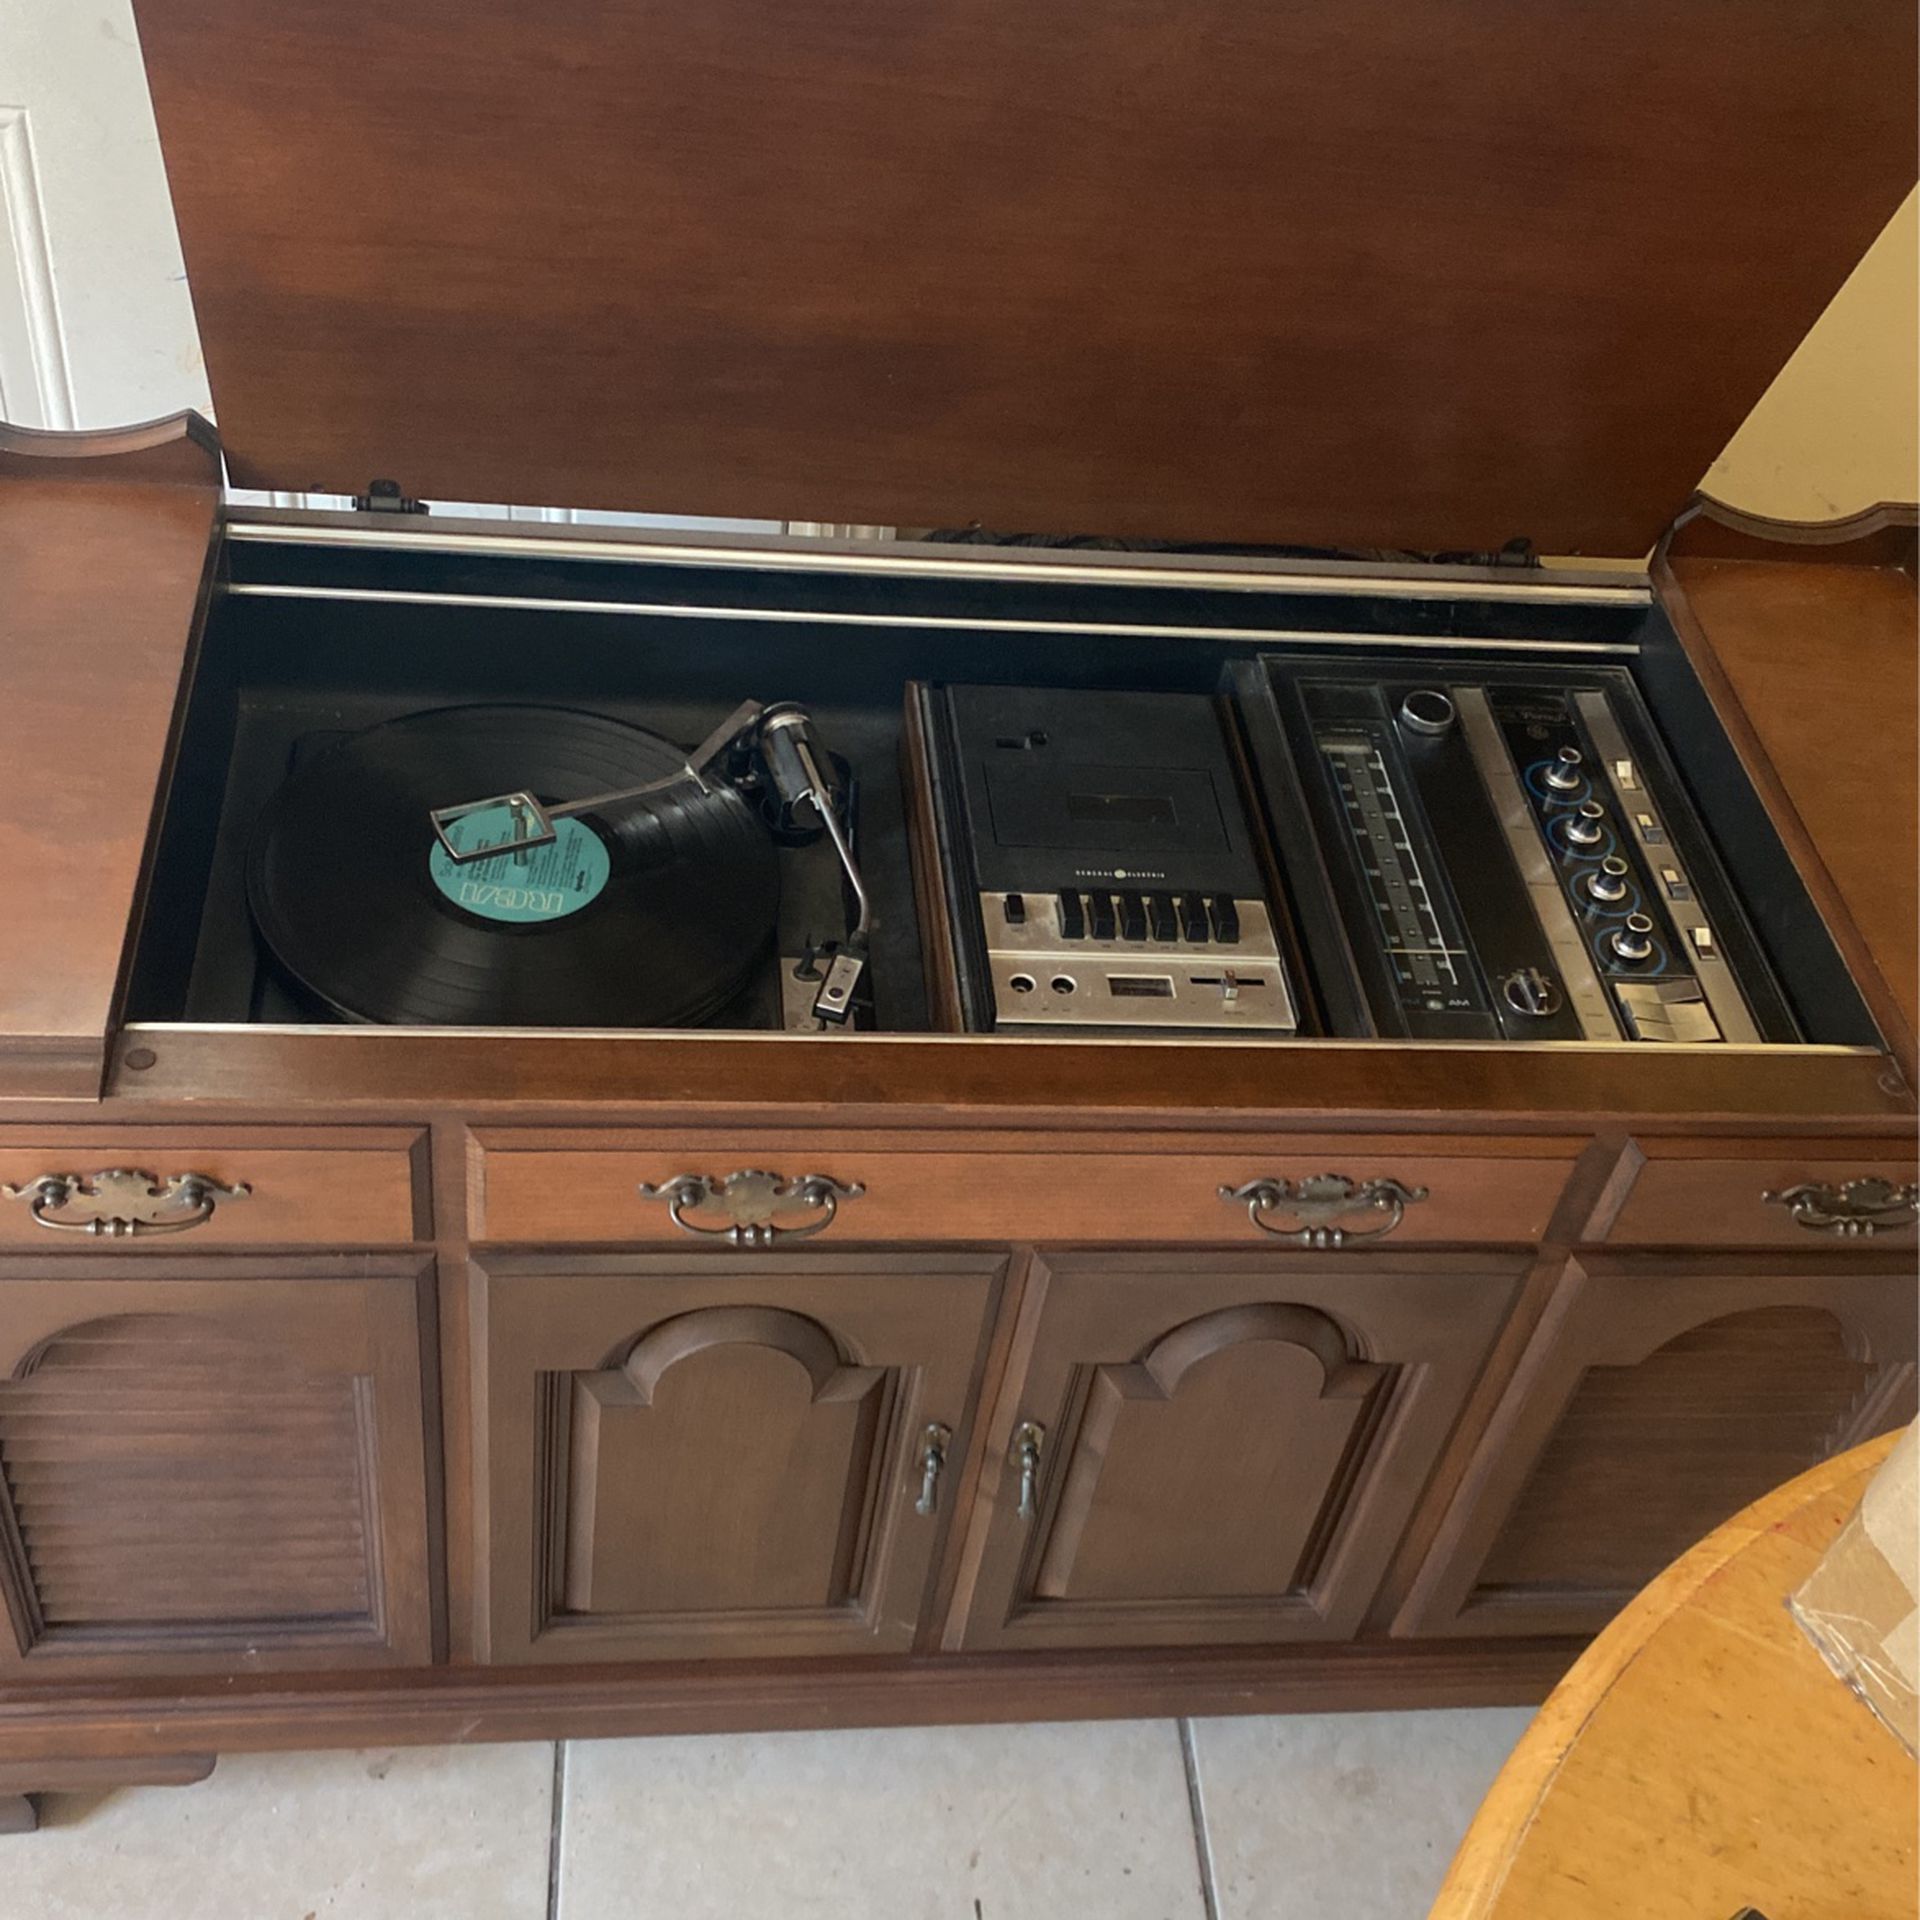 Antique stereo